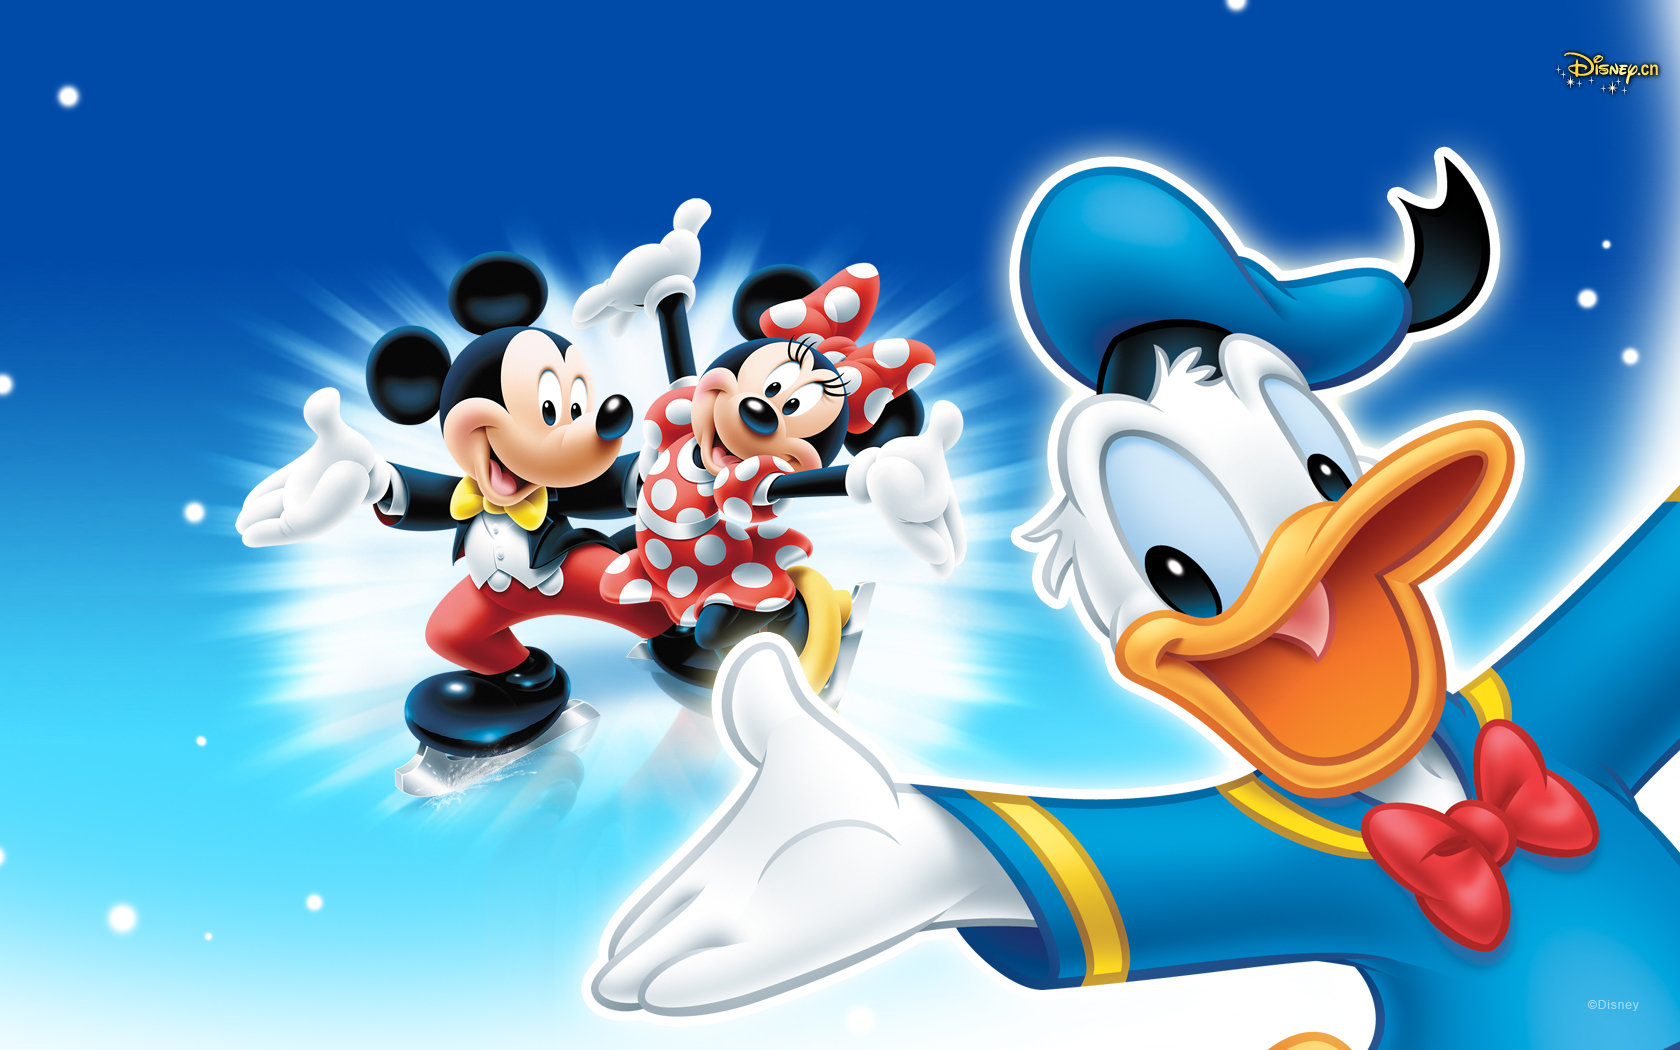 Mickey Mouse And Friends wallpapers HD for desktop backgrounds